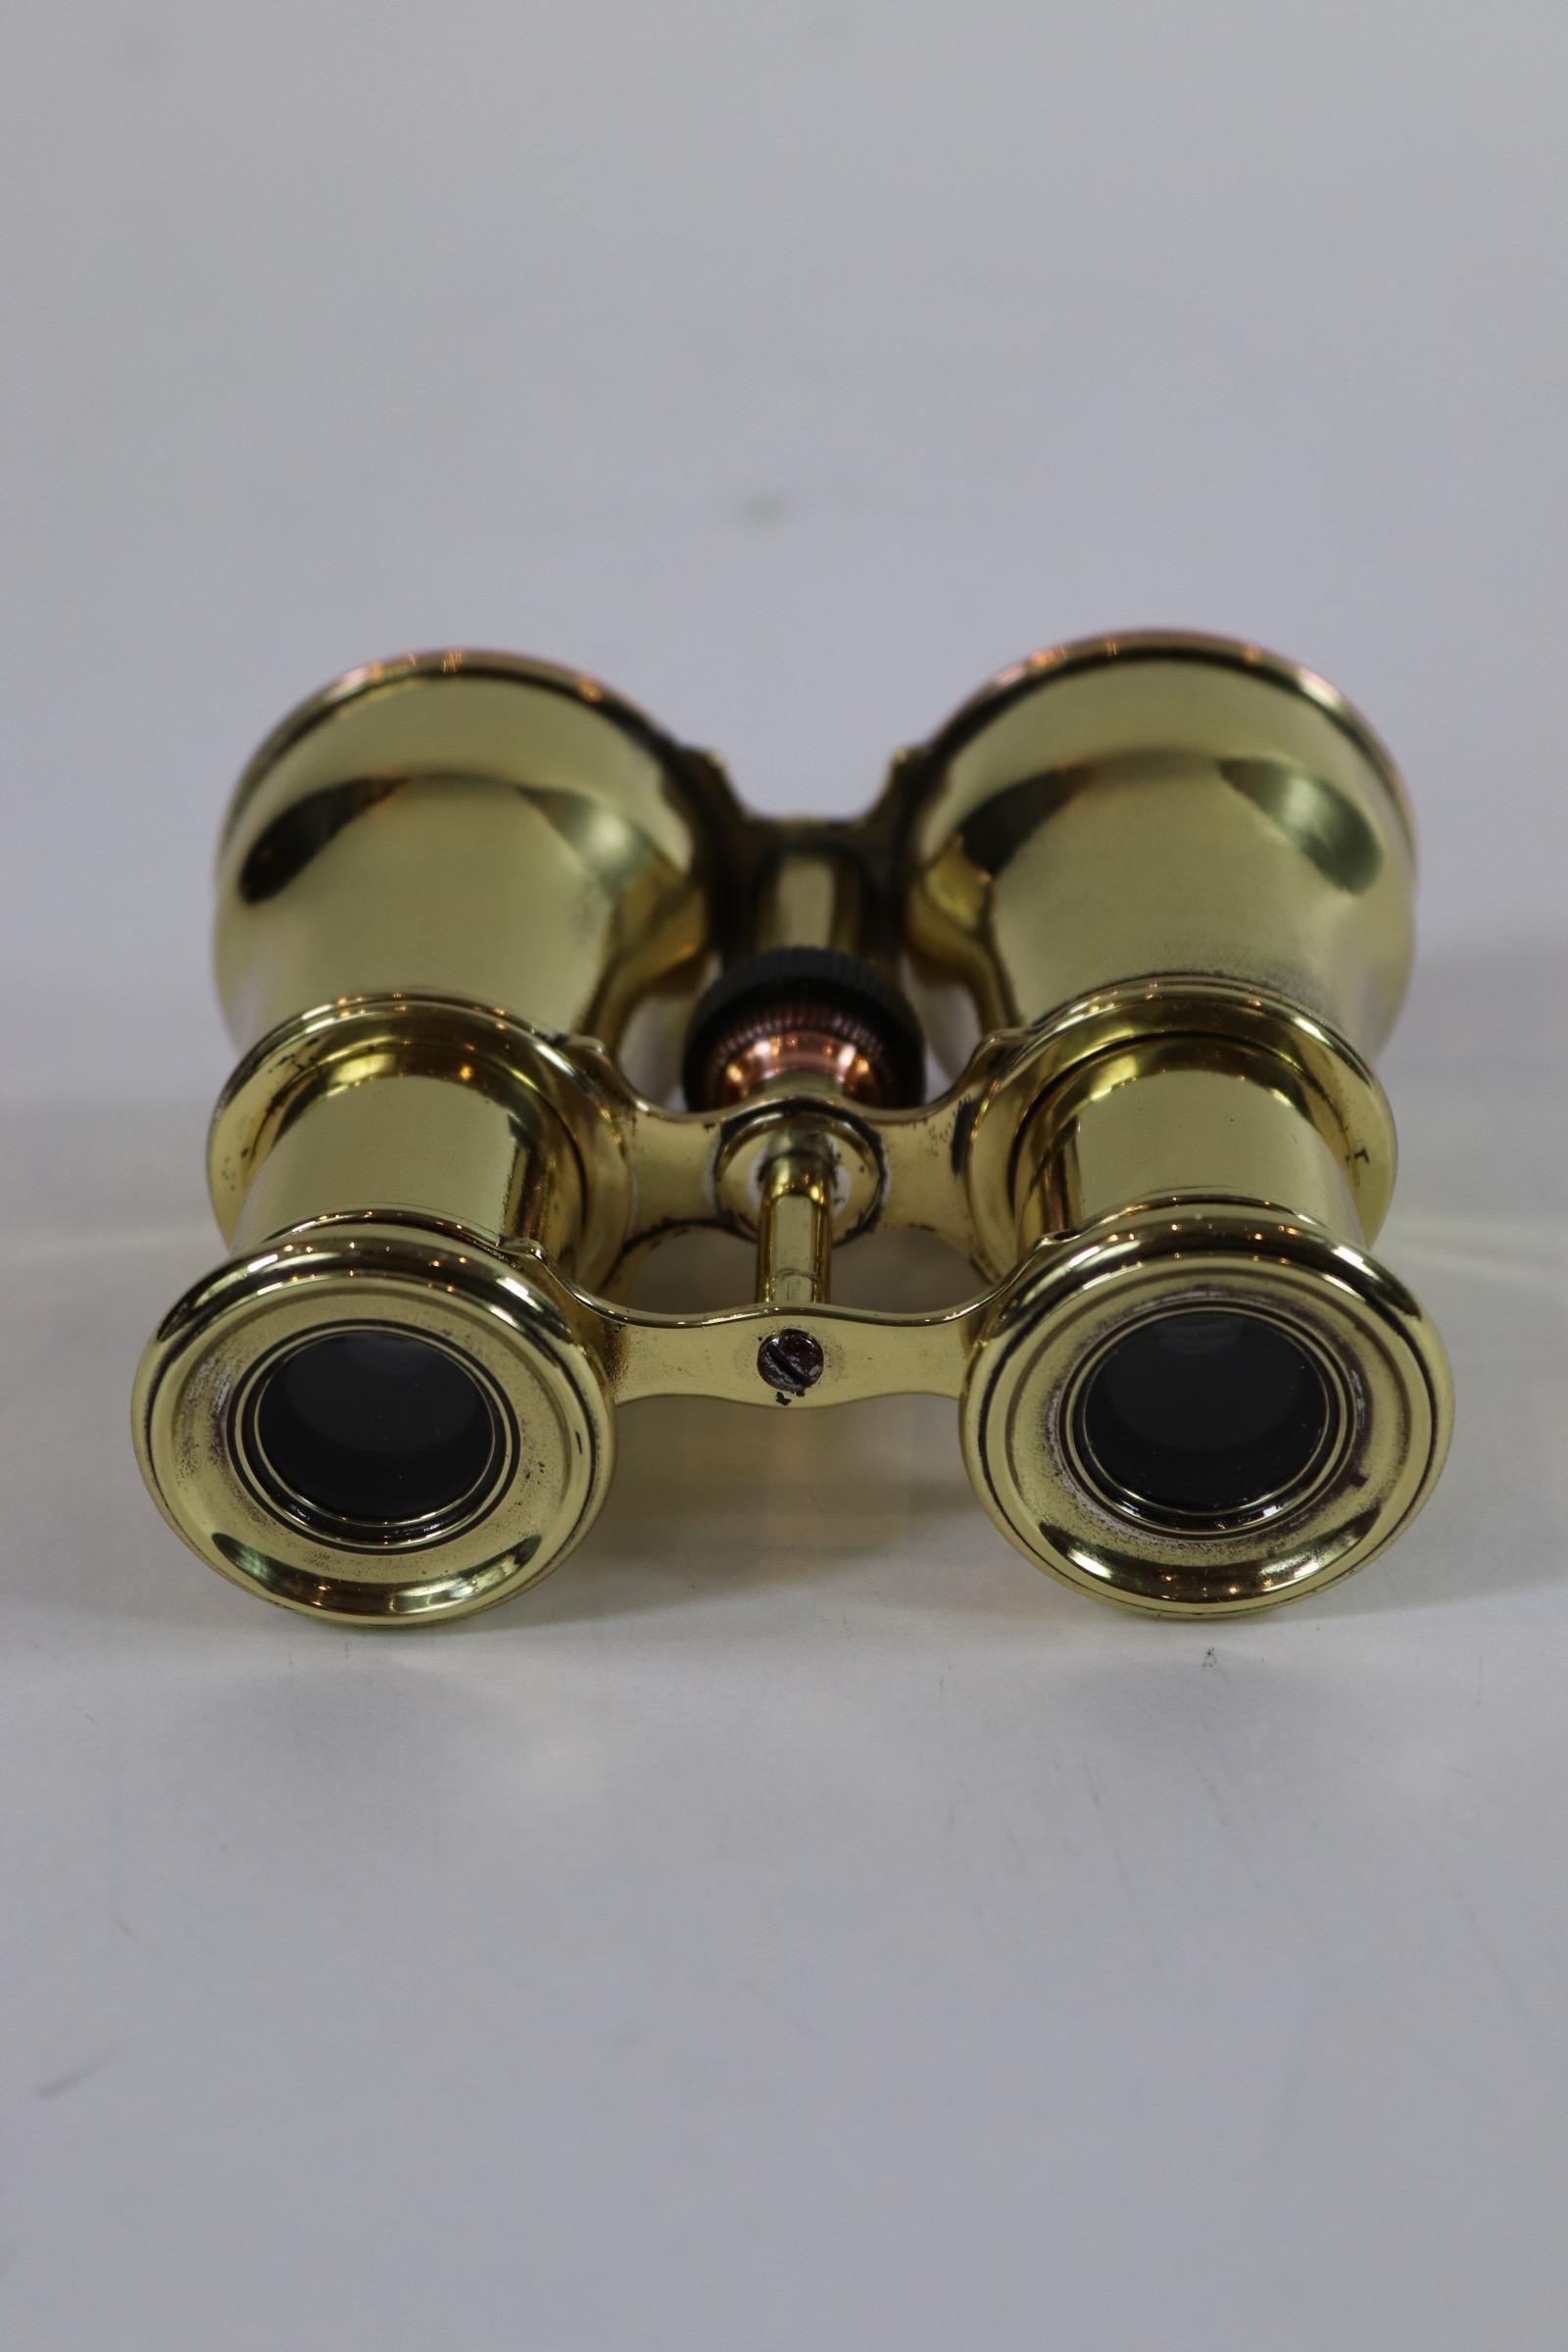 Pair of early 20th century marine binoculars. Polished and lacquered finish. Weight is 1 pound.